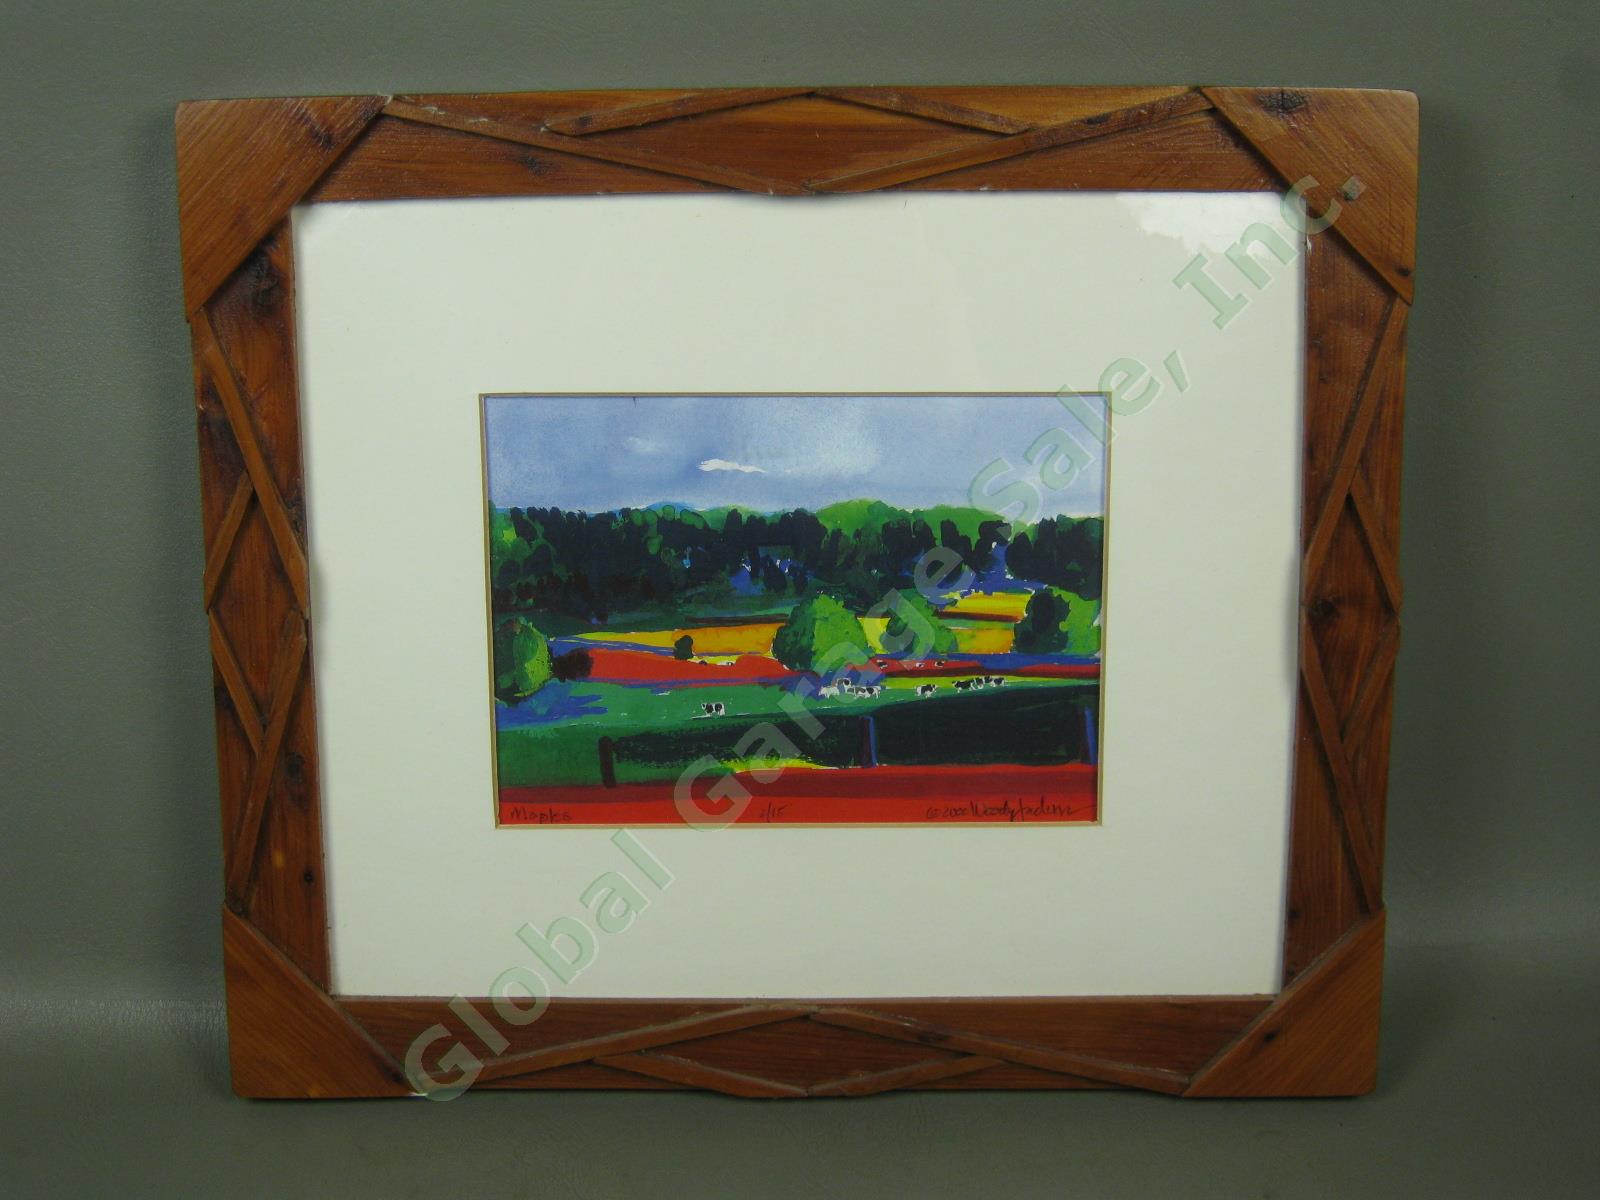 2000 Woody Jackson Vermont Artist Signed Limited Edition Print Maples 2/15 Frame